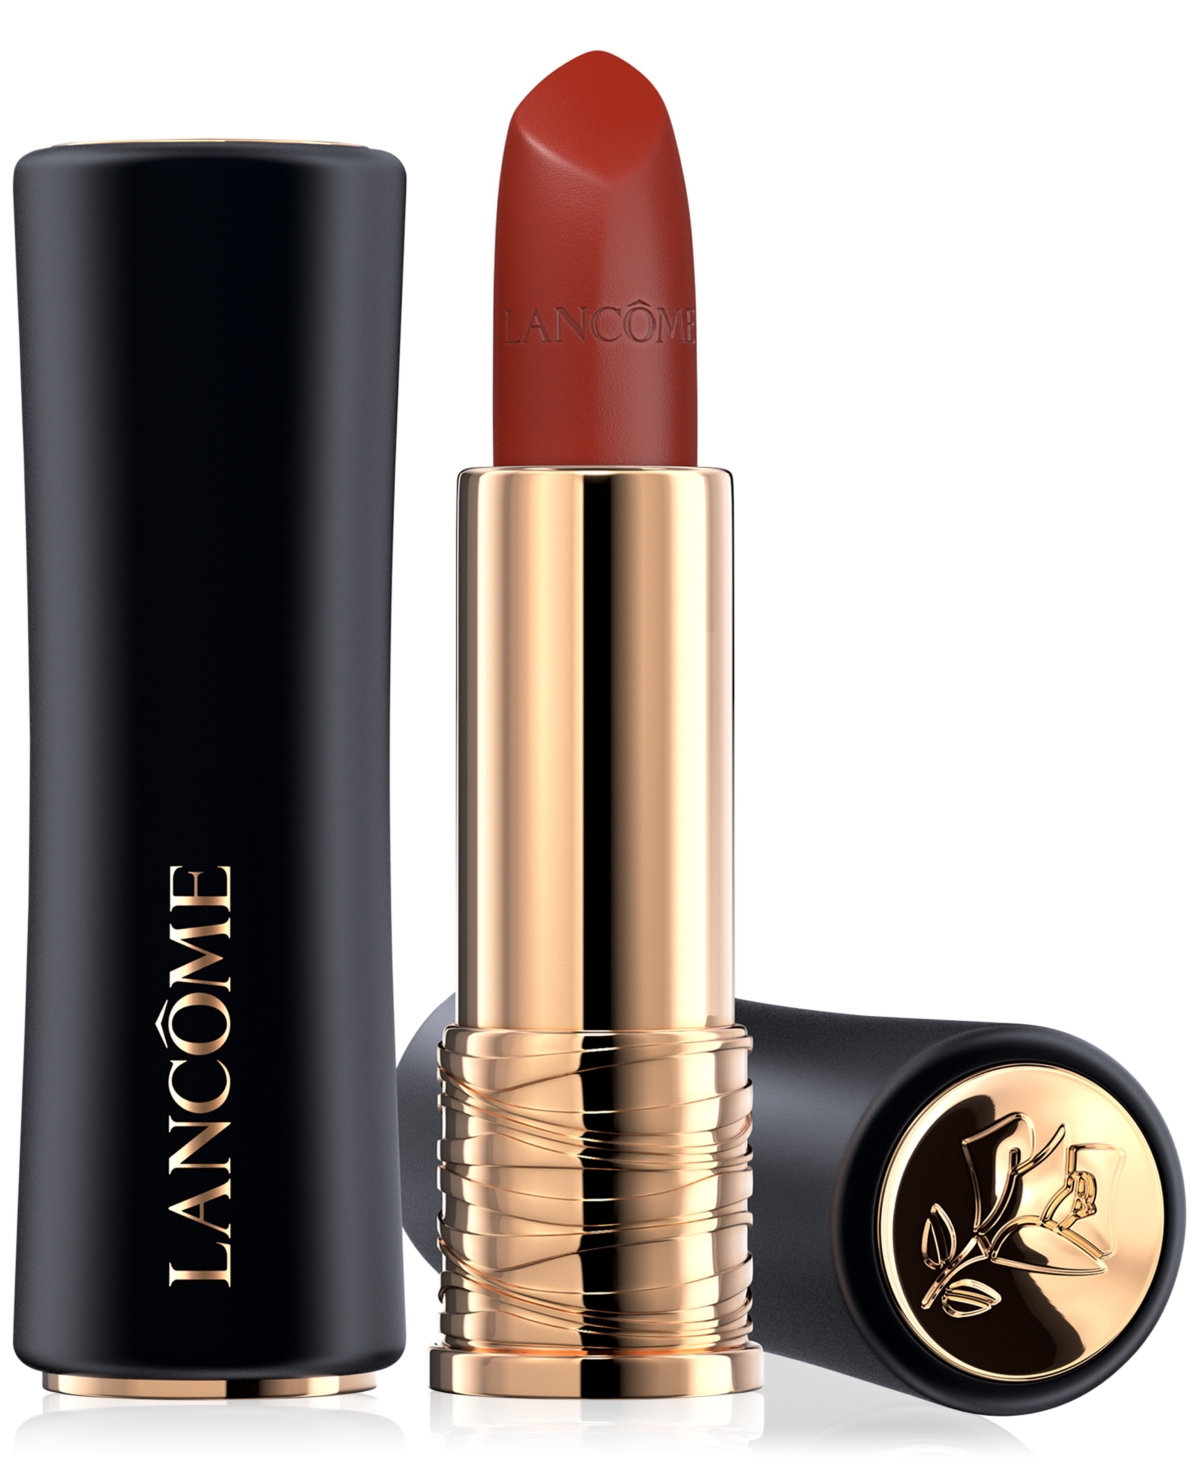 Lancôme L'absolu Rouge Matte Lipstick In -french-touch